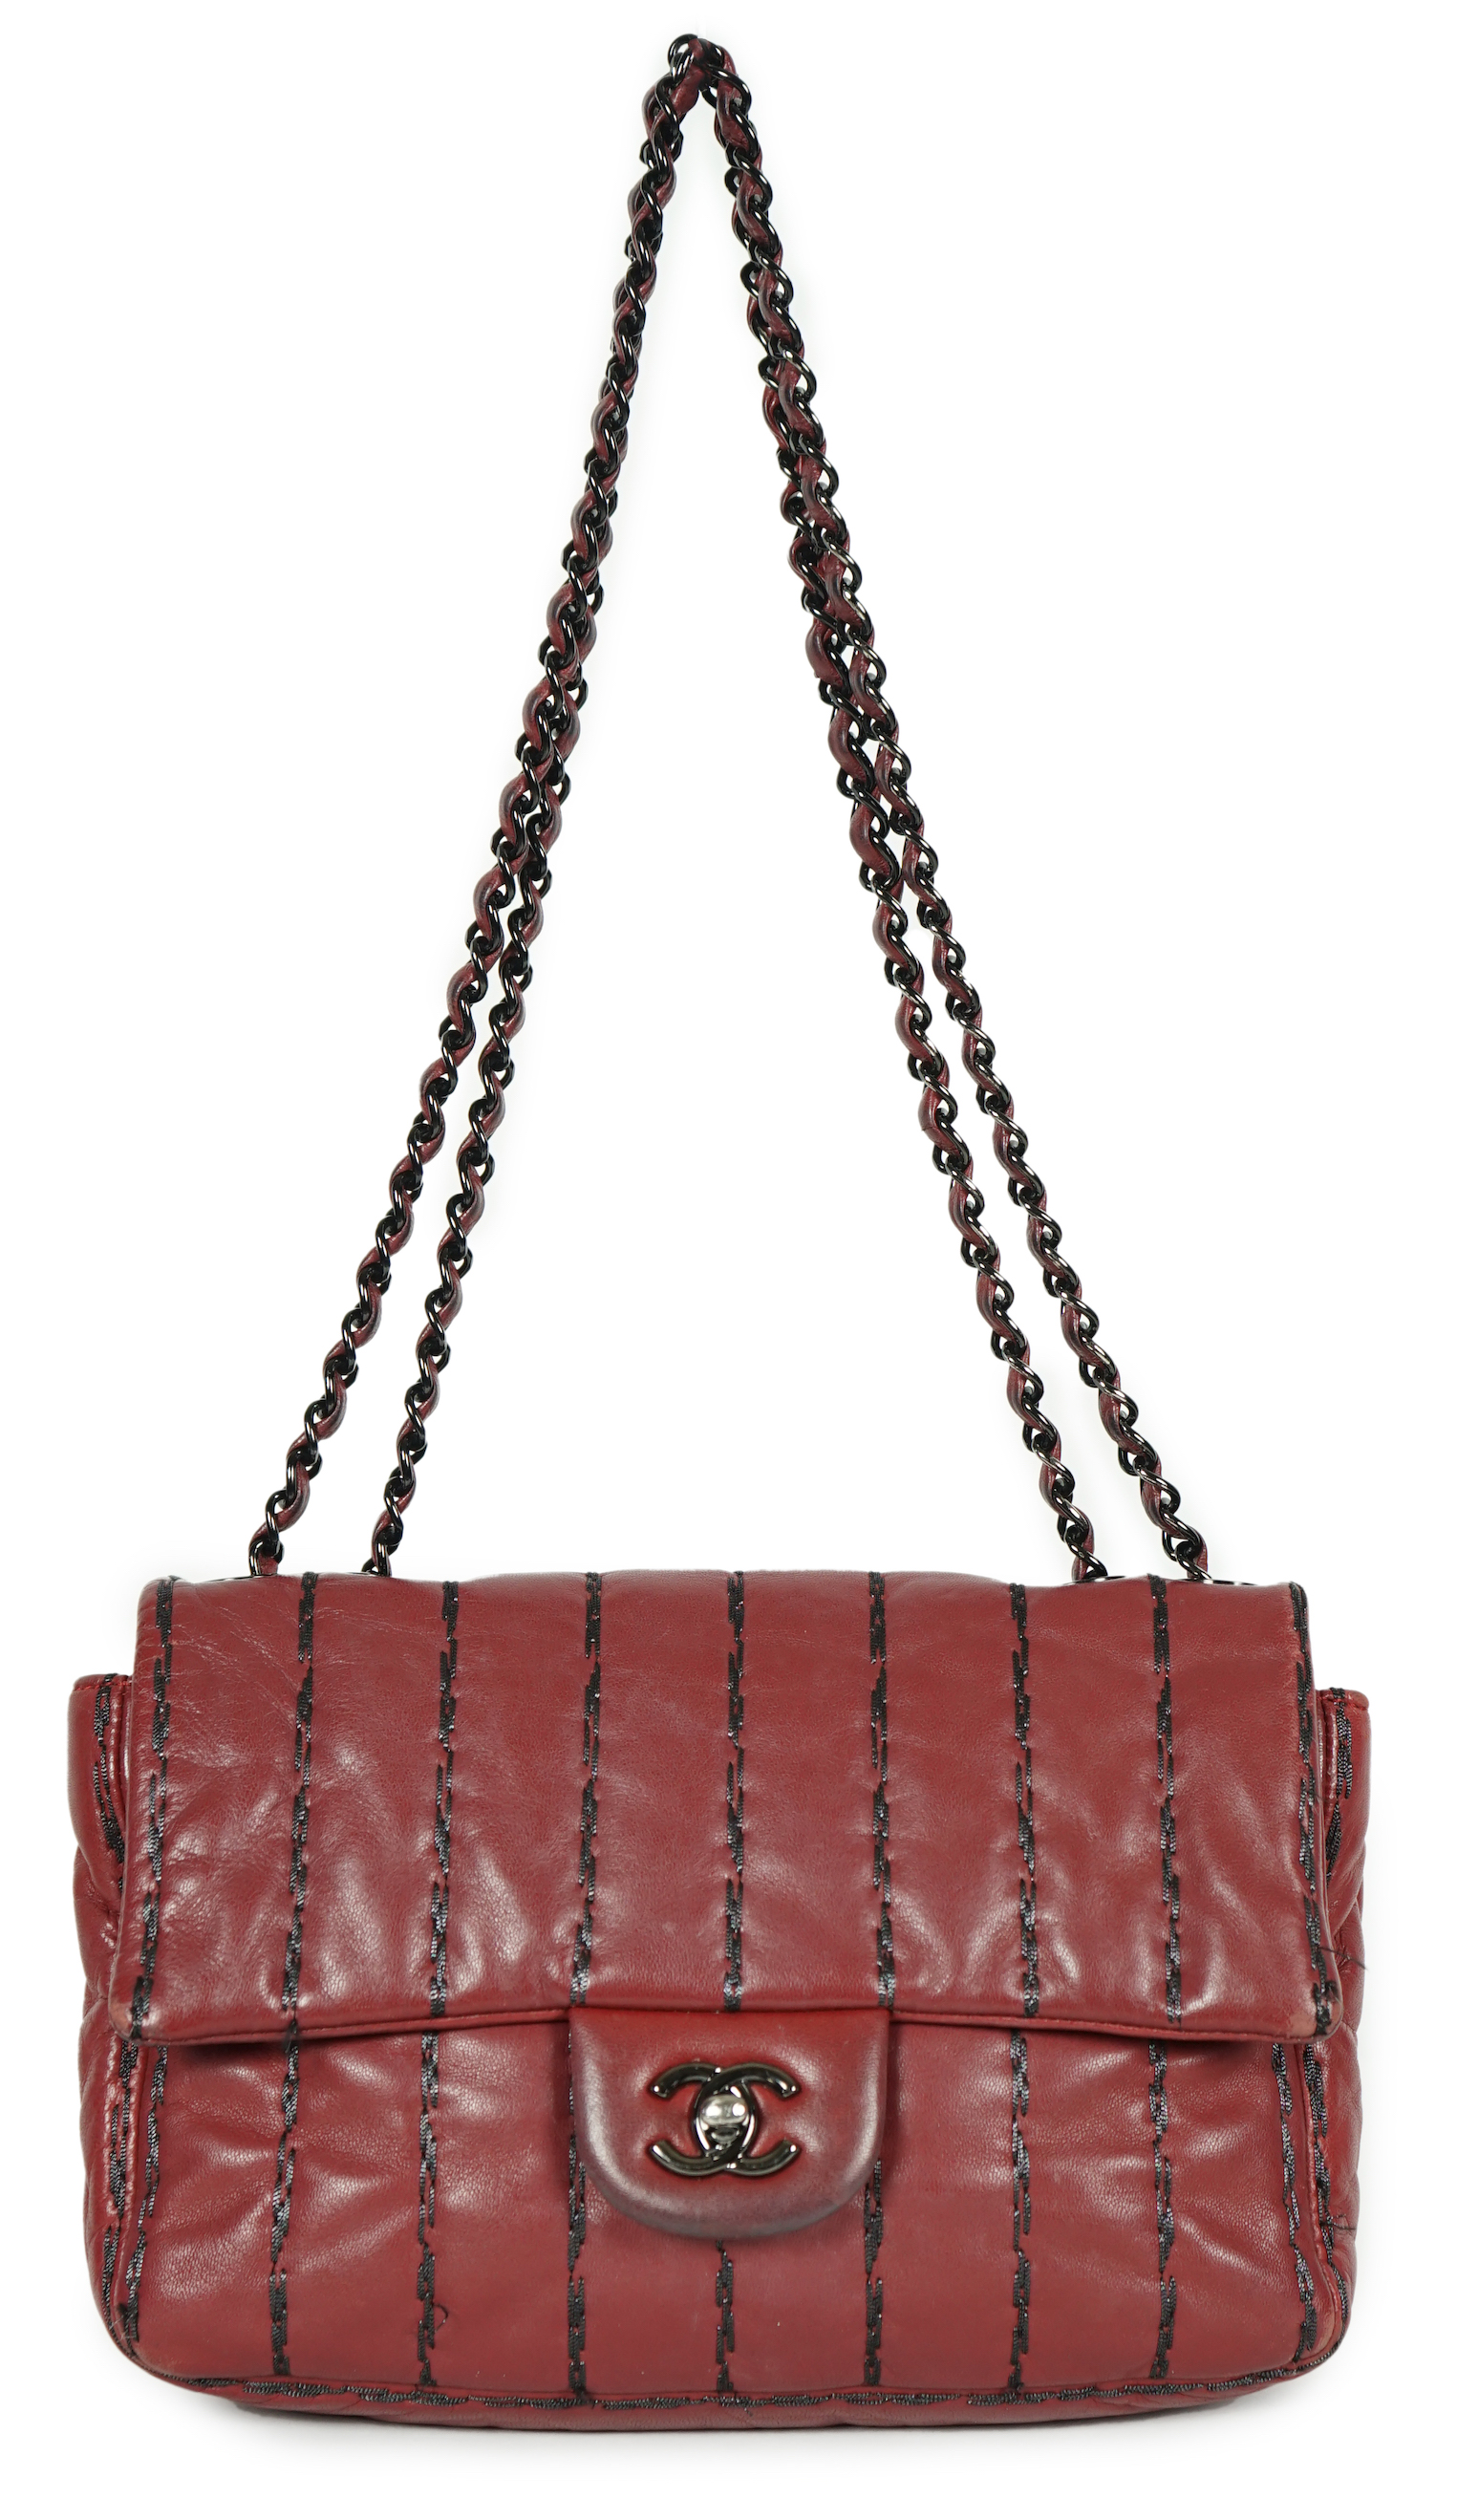 A Chanel Classic Jumbo Flap burgundy lambskin quilted shoulder bag, with pinstripe stitching, height 18cm, overall height 48cm, width 25cm, depth 6cm, Please note this lot attracts an additional import tax of 20% on the